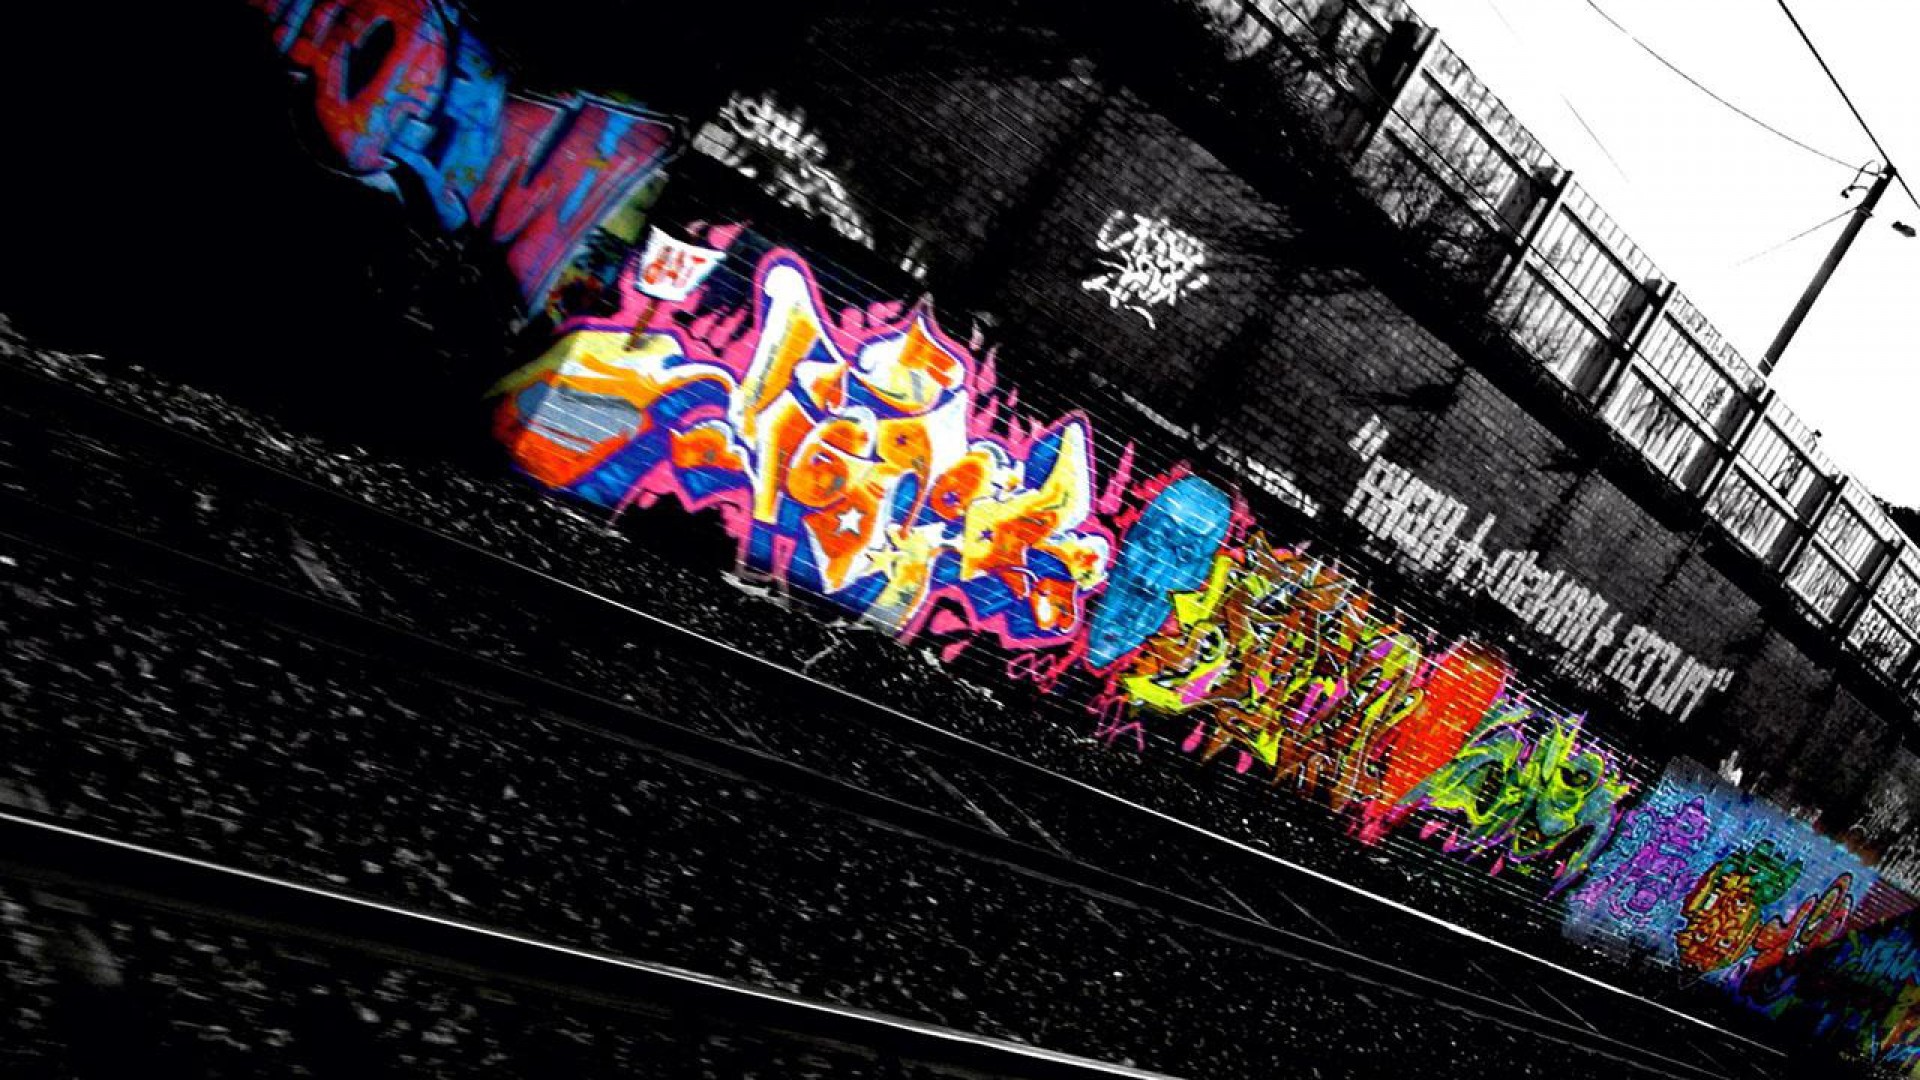 Wallpaper HD Graffiti Art With Resolution 1920X1080 pixel. You can make this wallpaper for your Desktop Computer Backgrounds, Mac Wallpapers, Android Lock screen or iPhone Screensavers